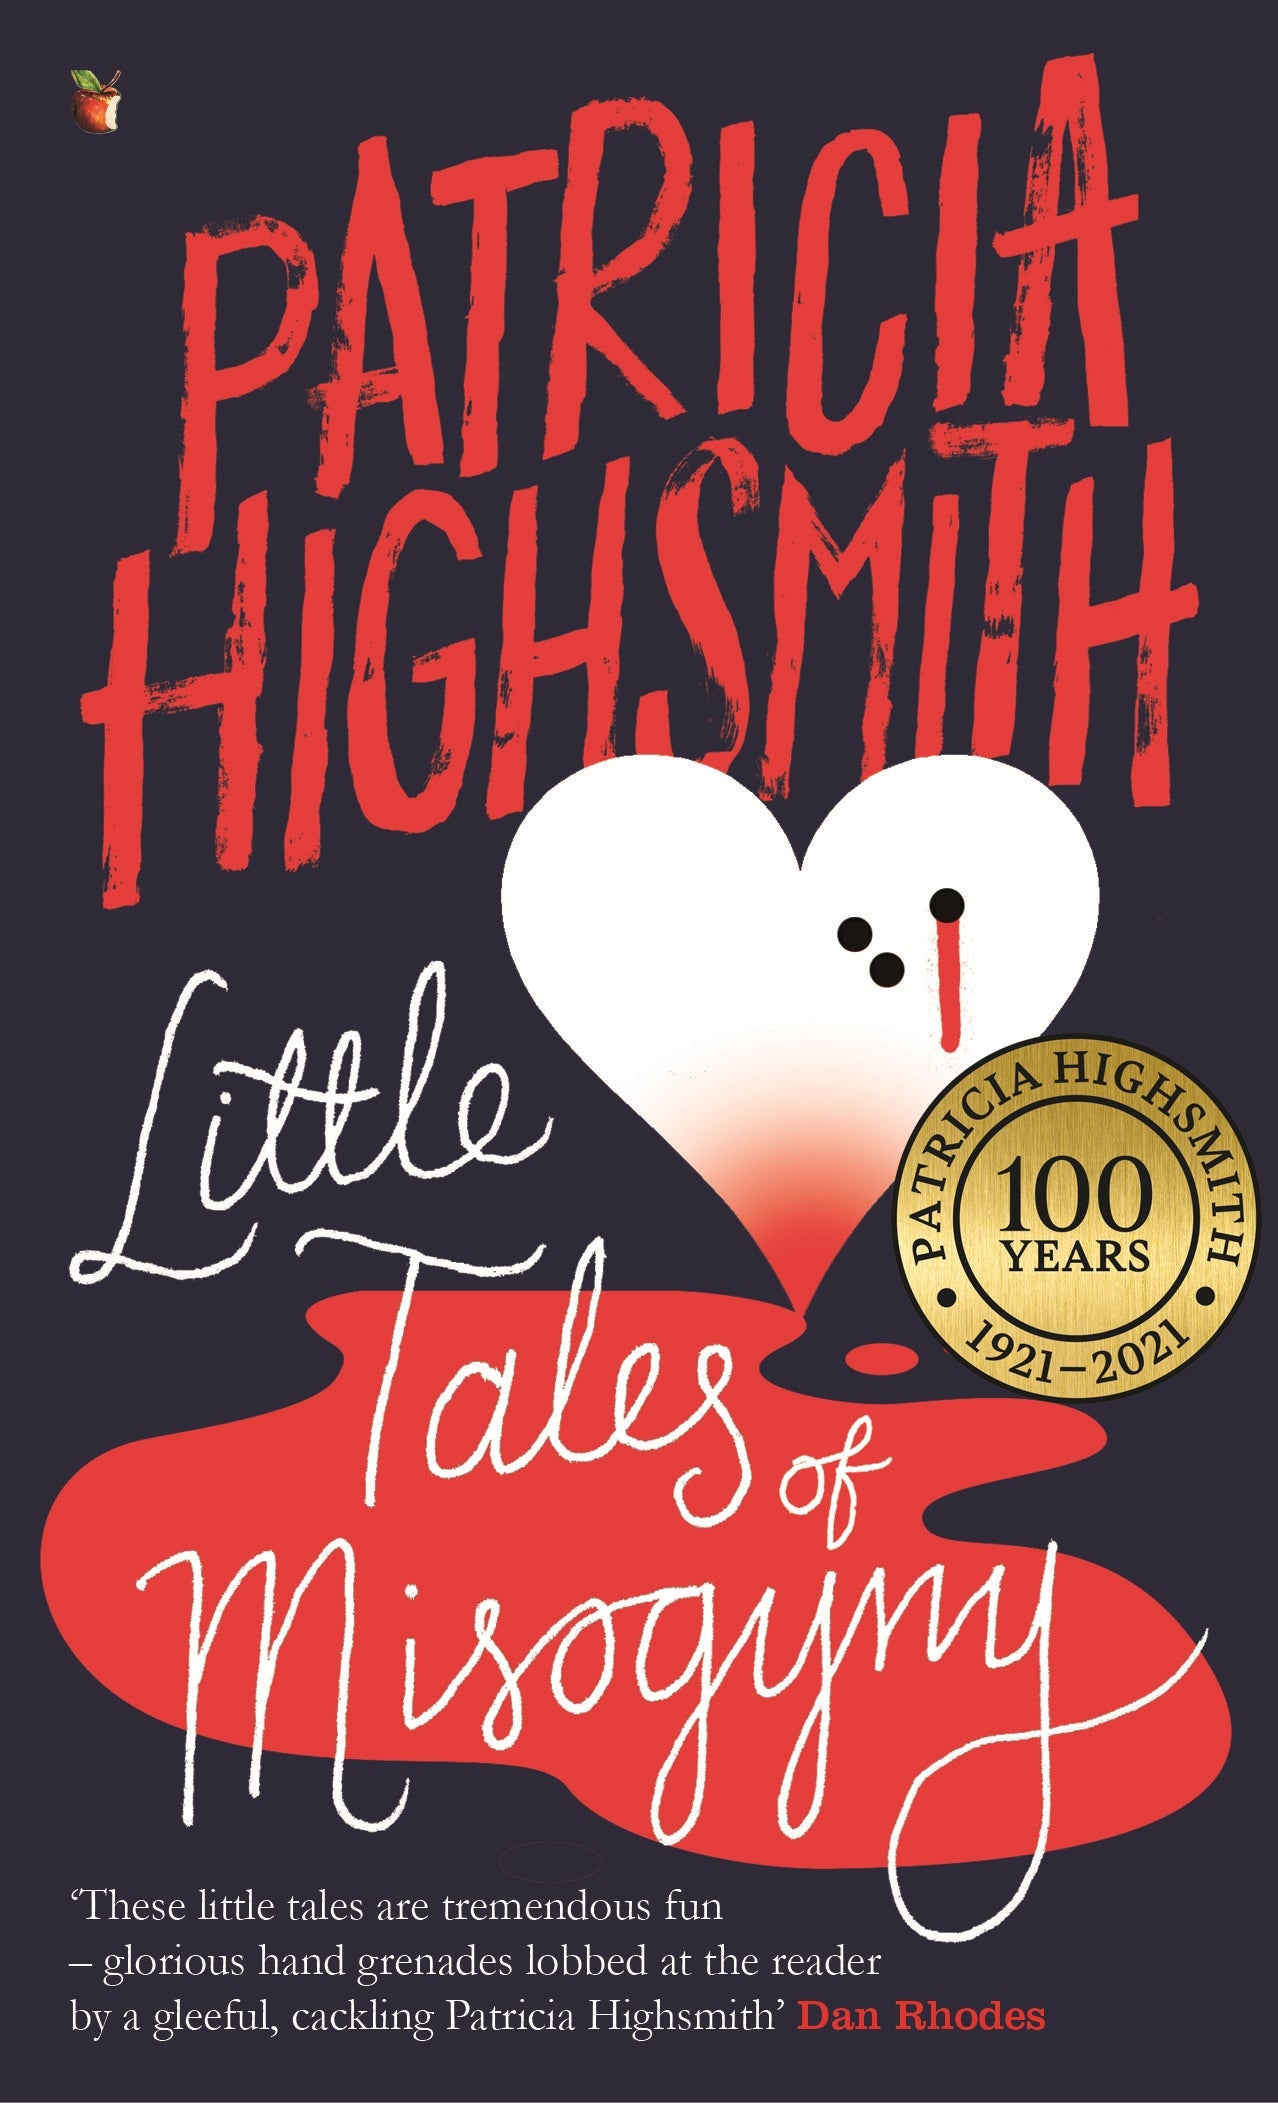 Little Tales of Misogyny by Patricia Highsmith